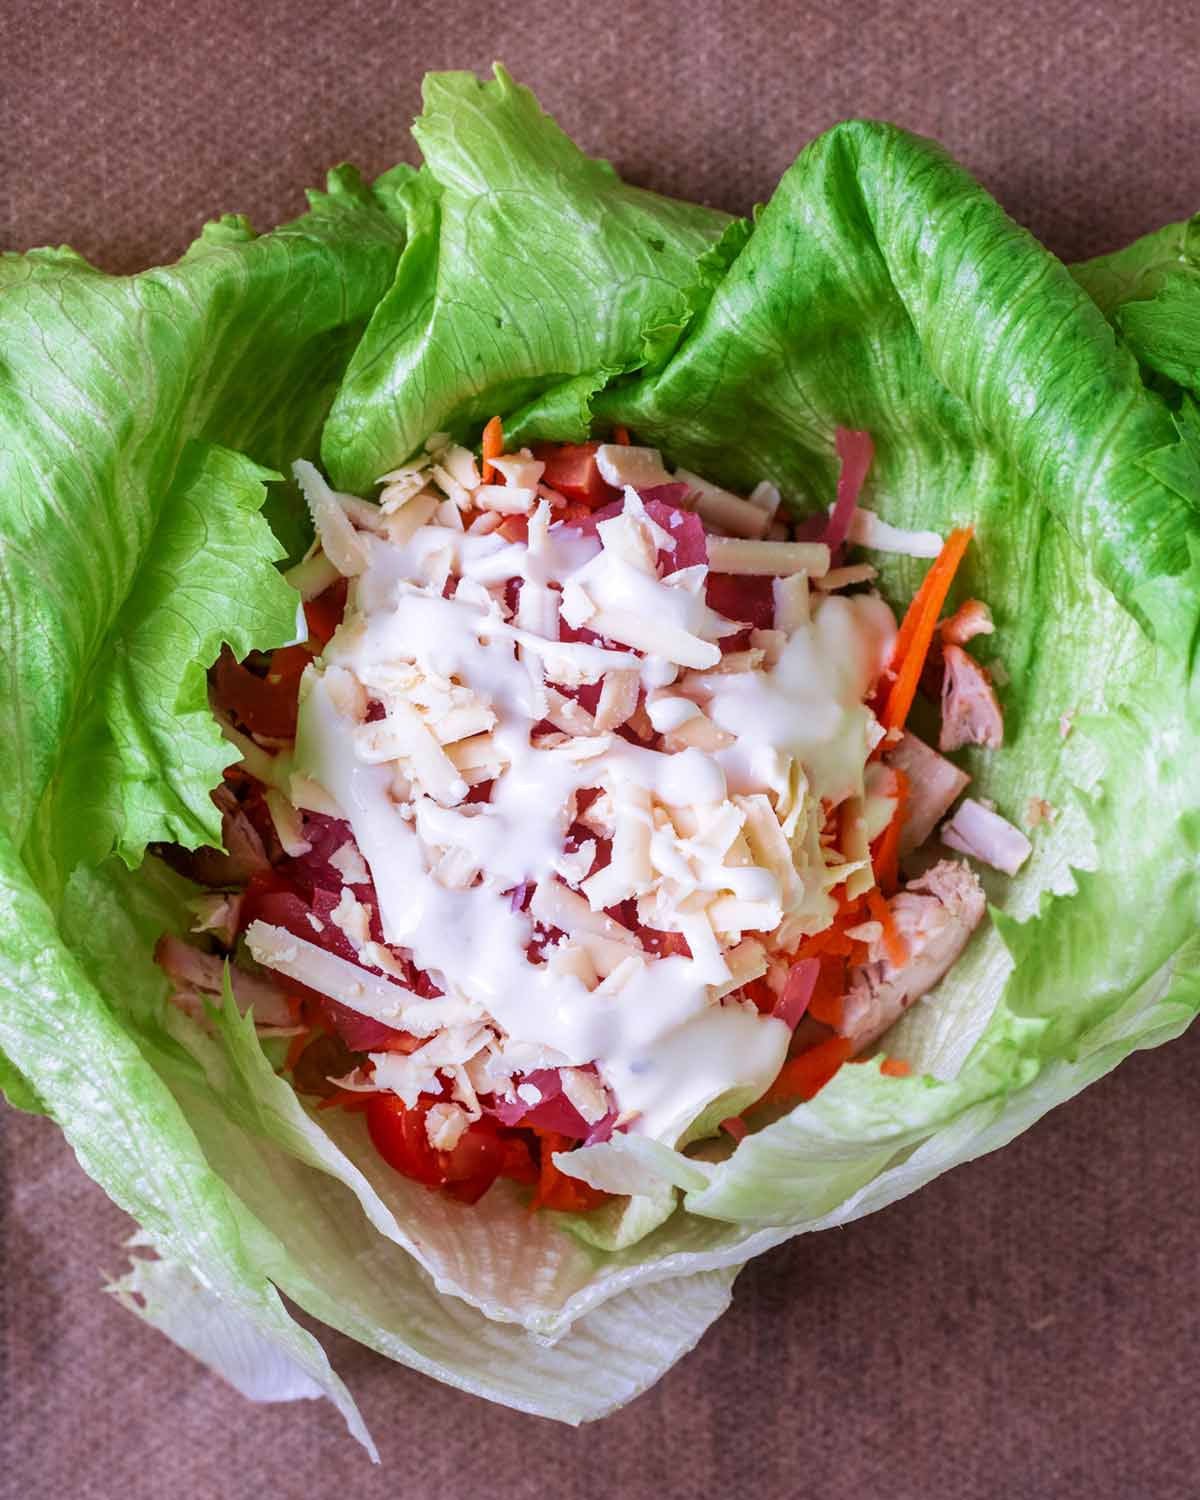 Salad items, diced chicken, cheese and sauce inside the lettuce leaves.